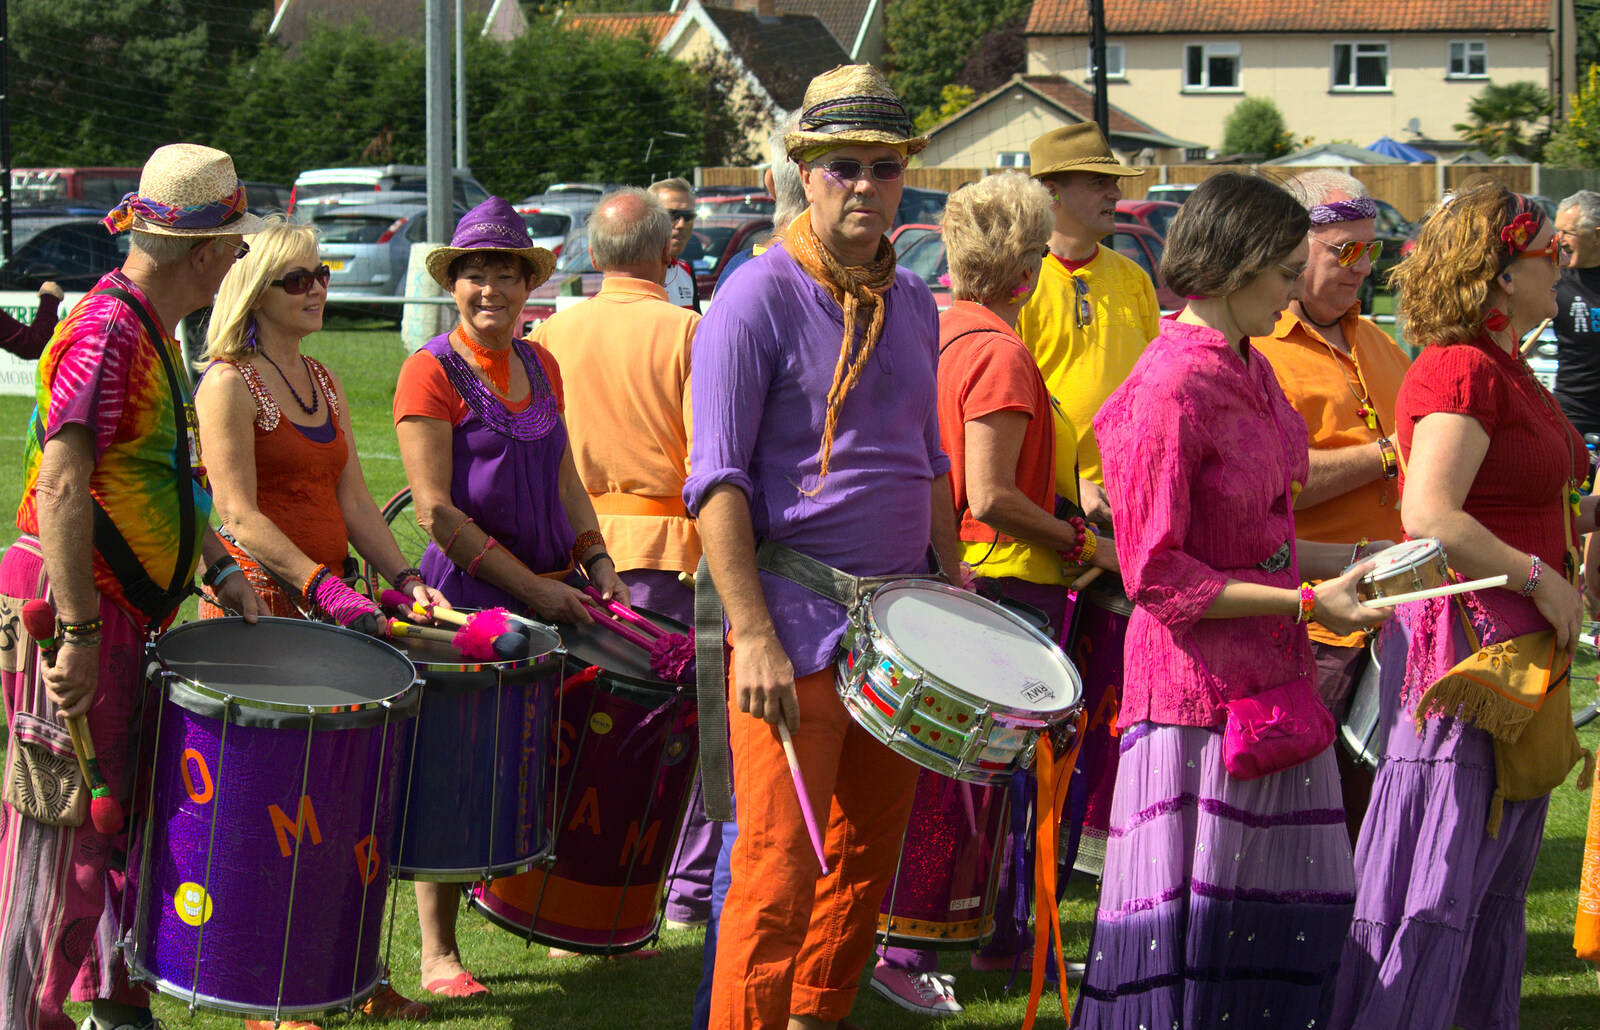 The Samba band have moved to the playing field from The Framlingham 10k Run, Suffolk - 31st August 2014